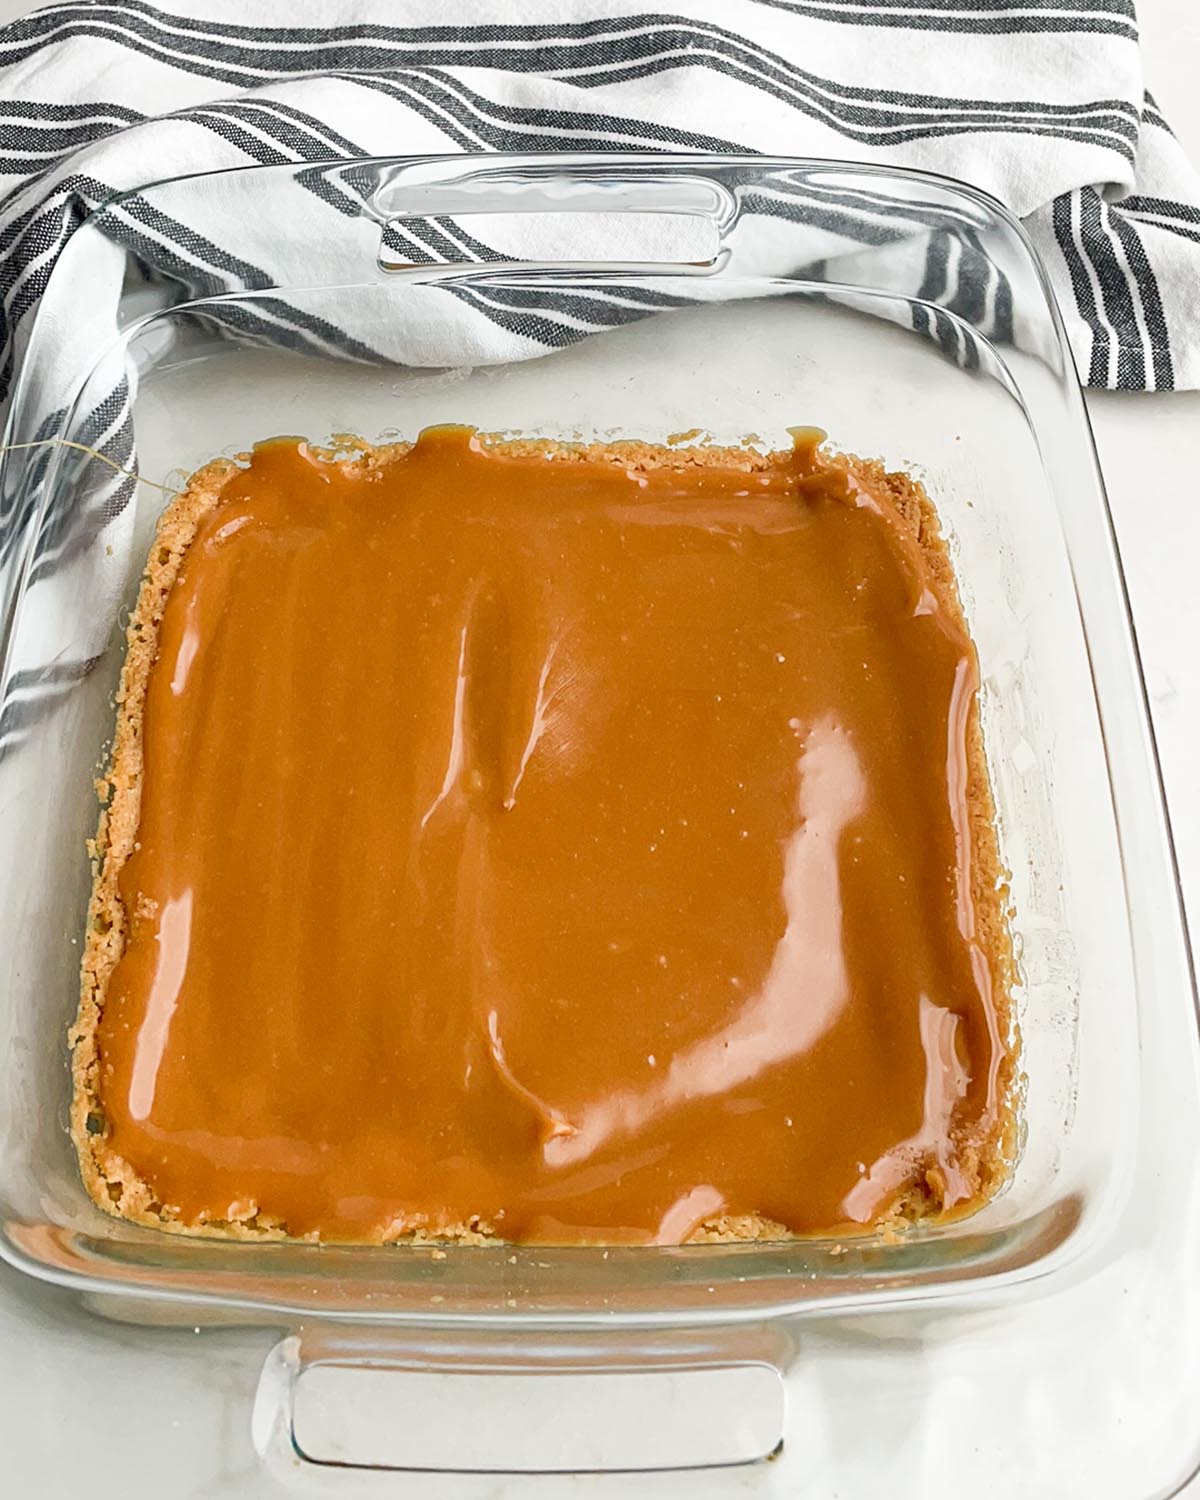 Shortbread crust with caramel poured over the top in a clear baking dish